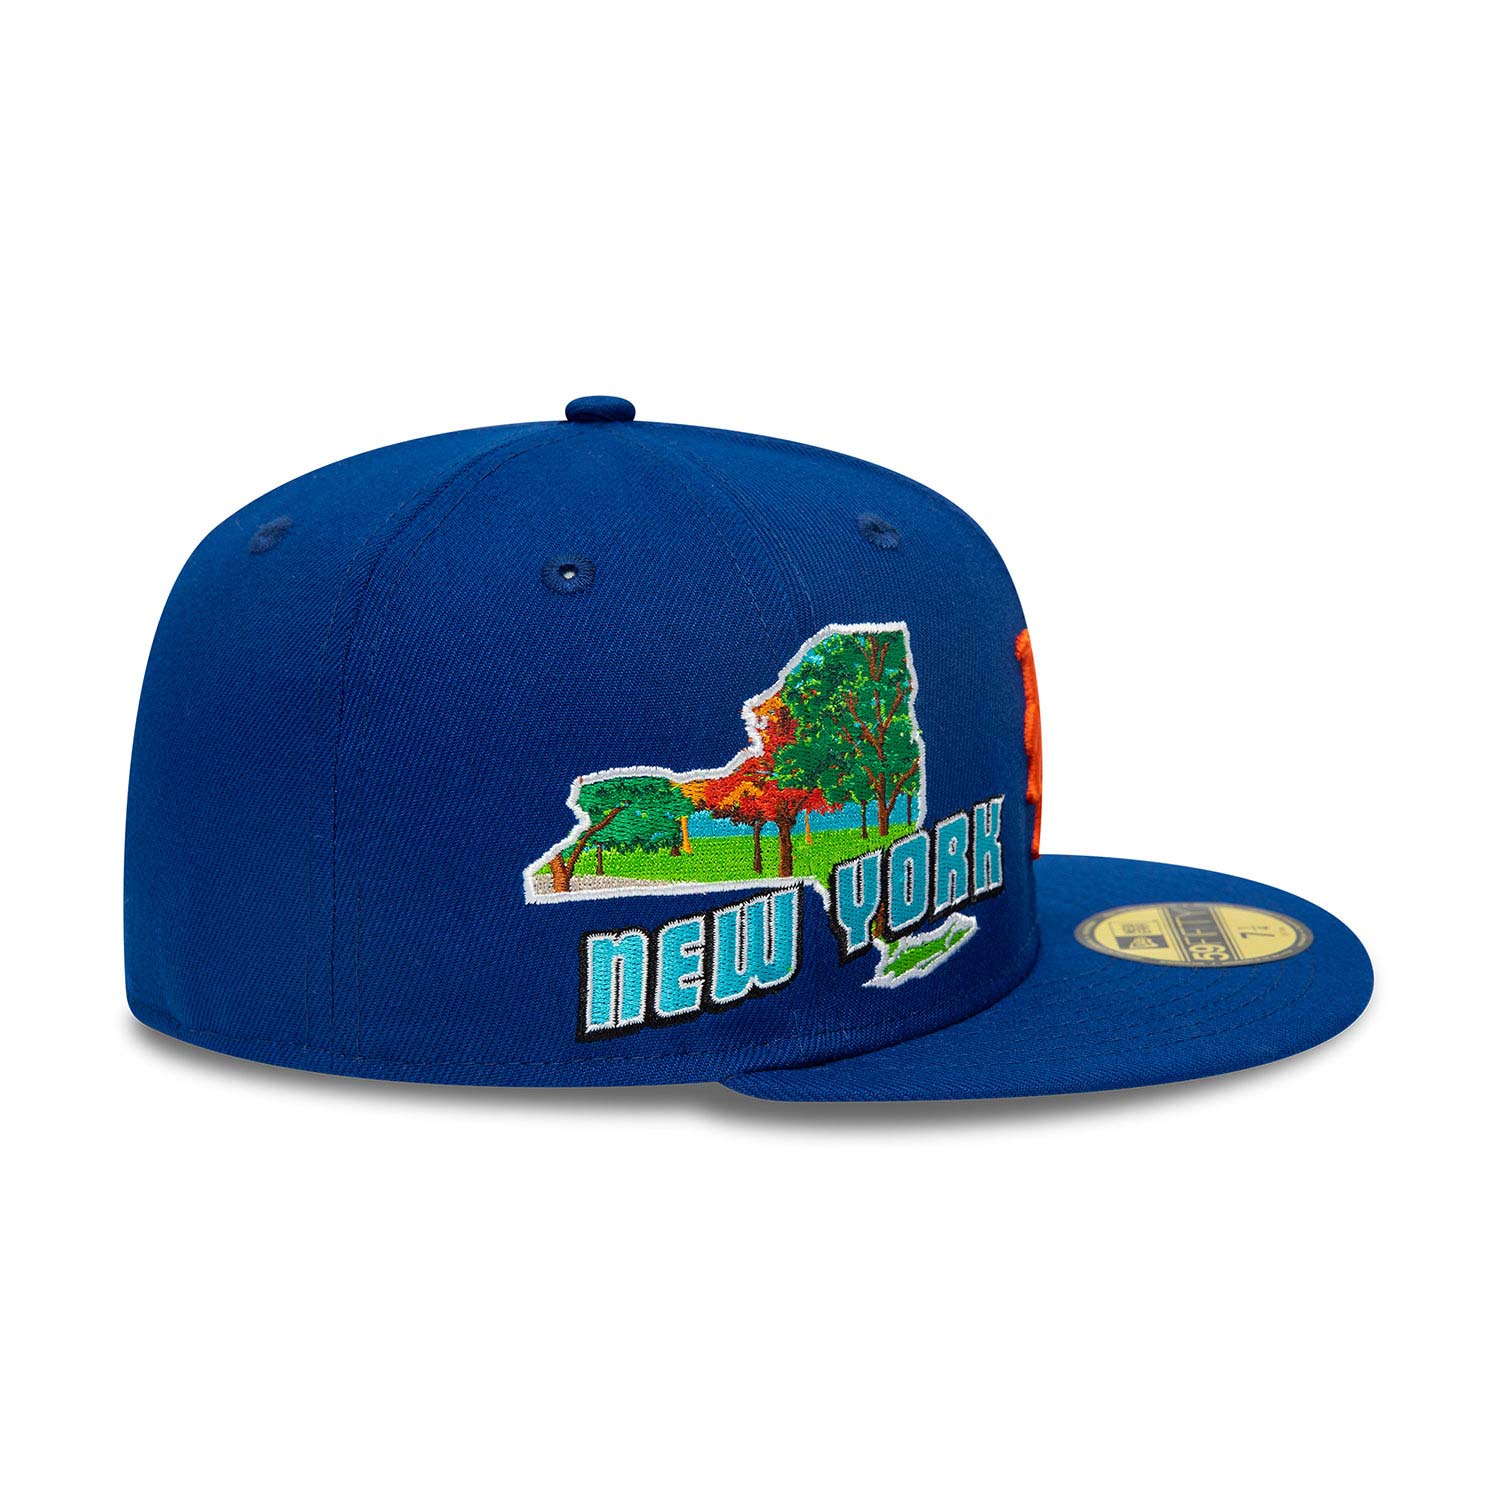 New York Mets Stateview Blue 59FIFTY Fitted Cap